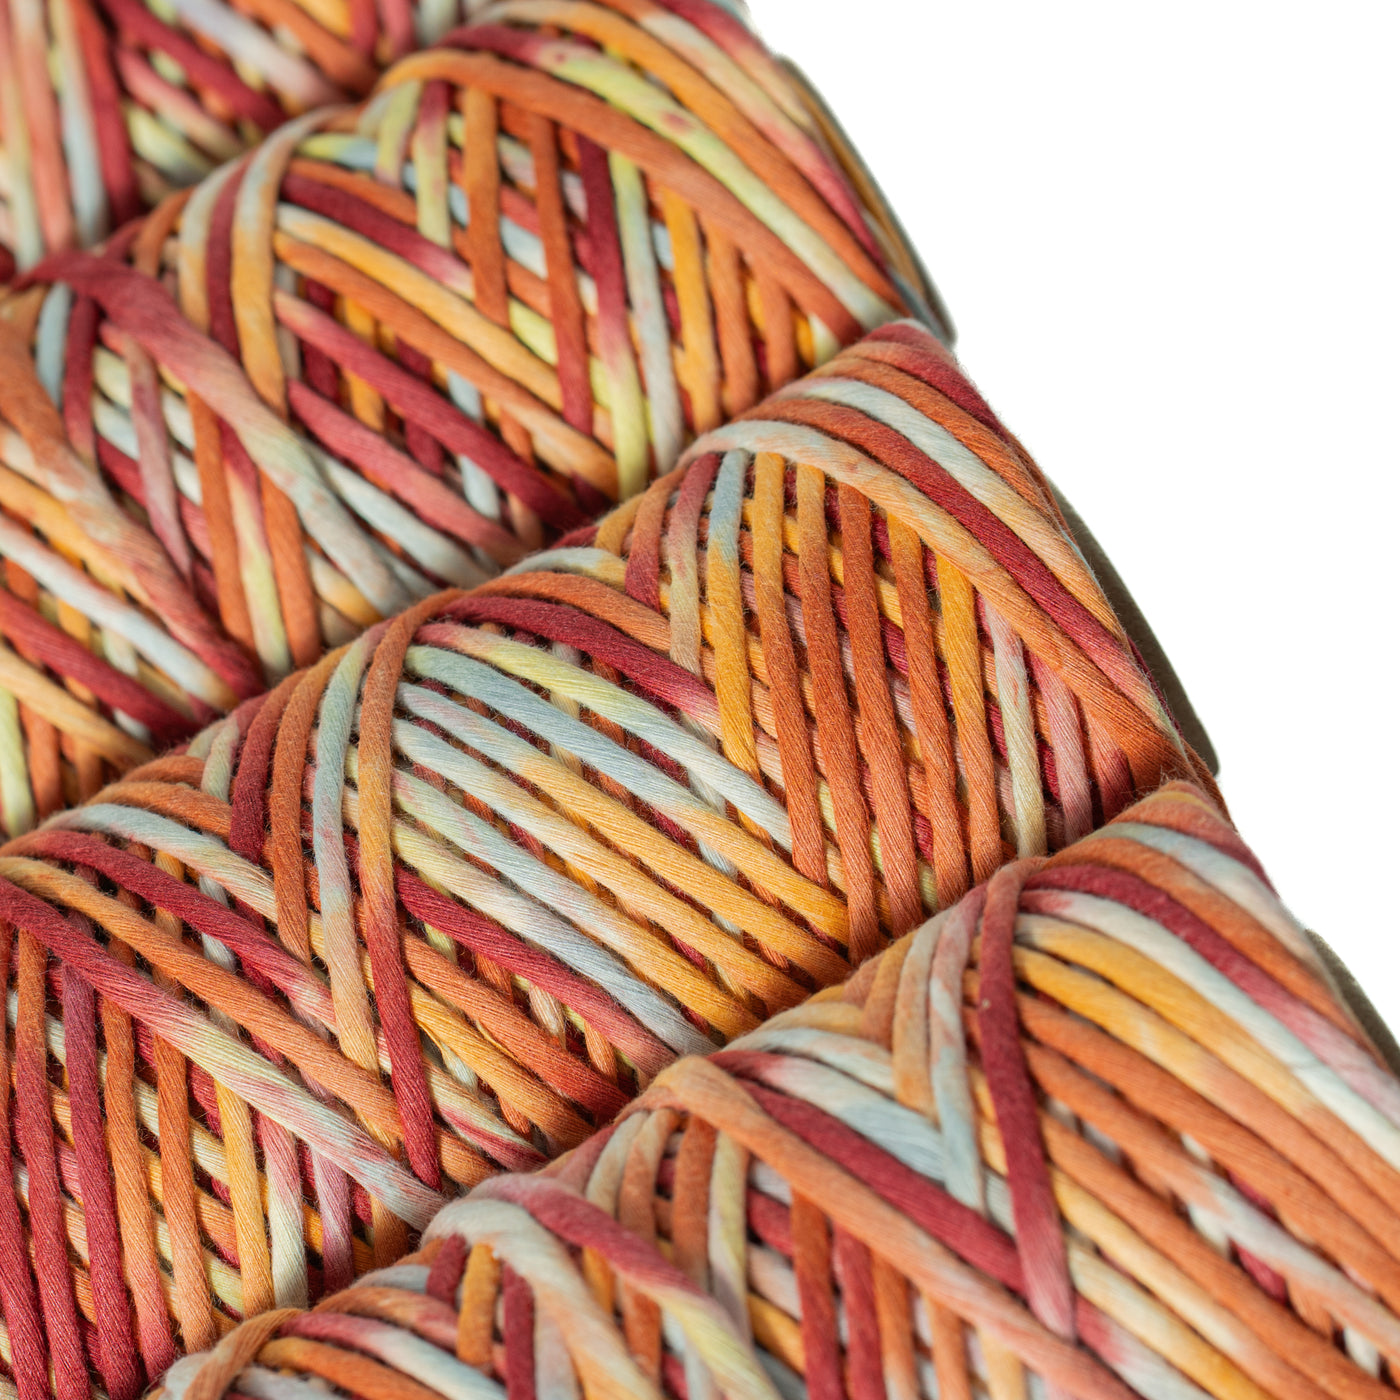 Hand Painted Soft Cotton Cord 4mm - 1 Single Strand - Robin